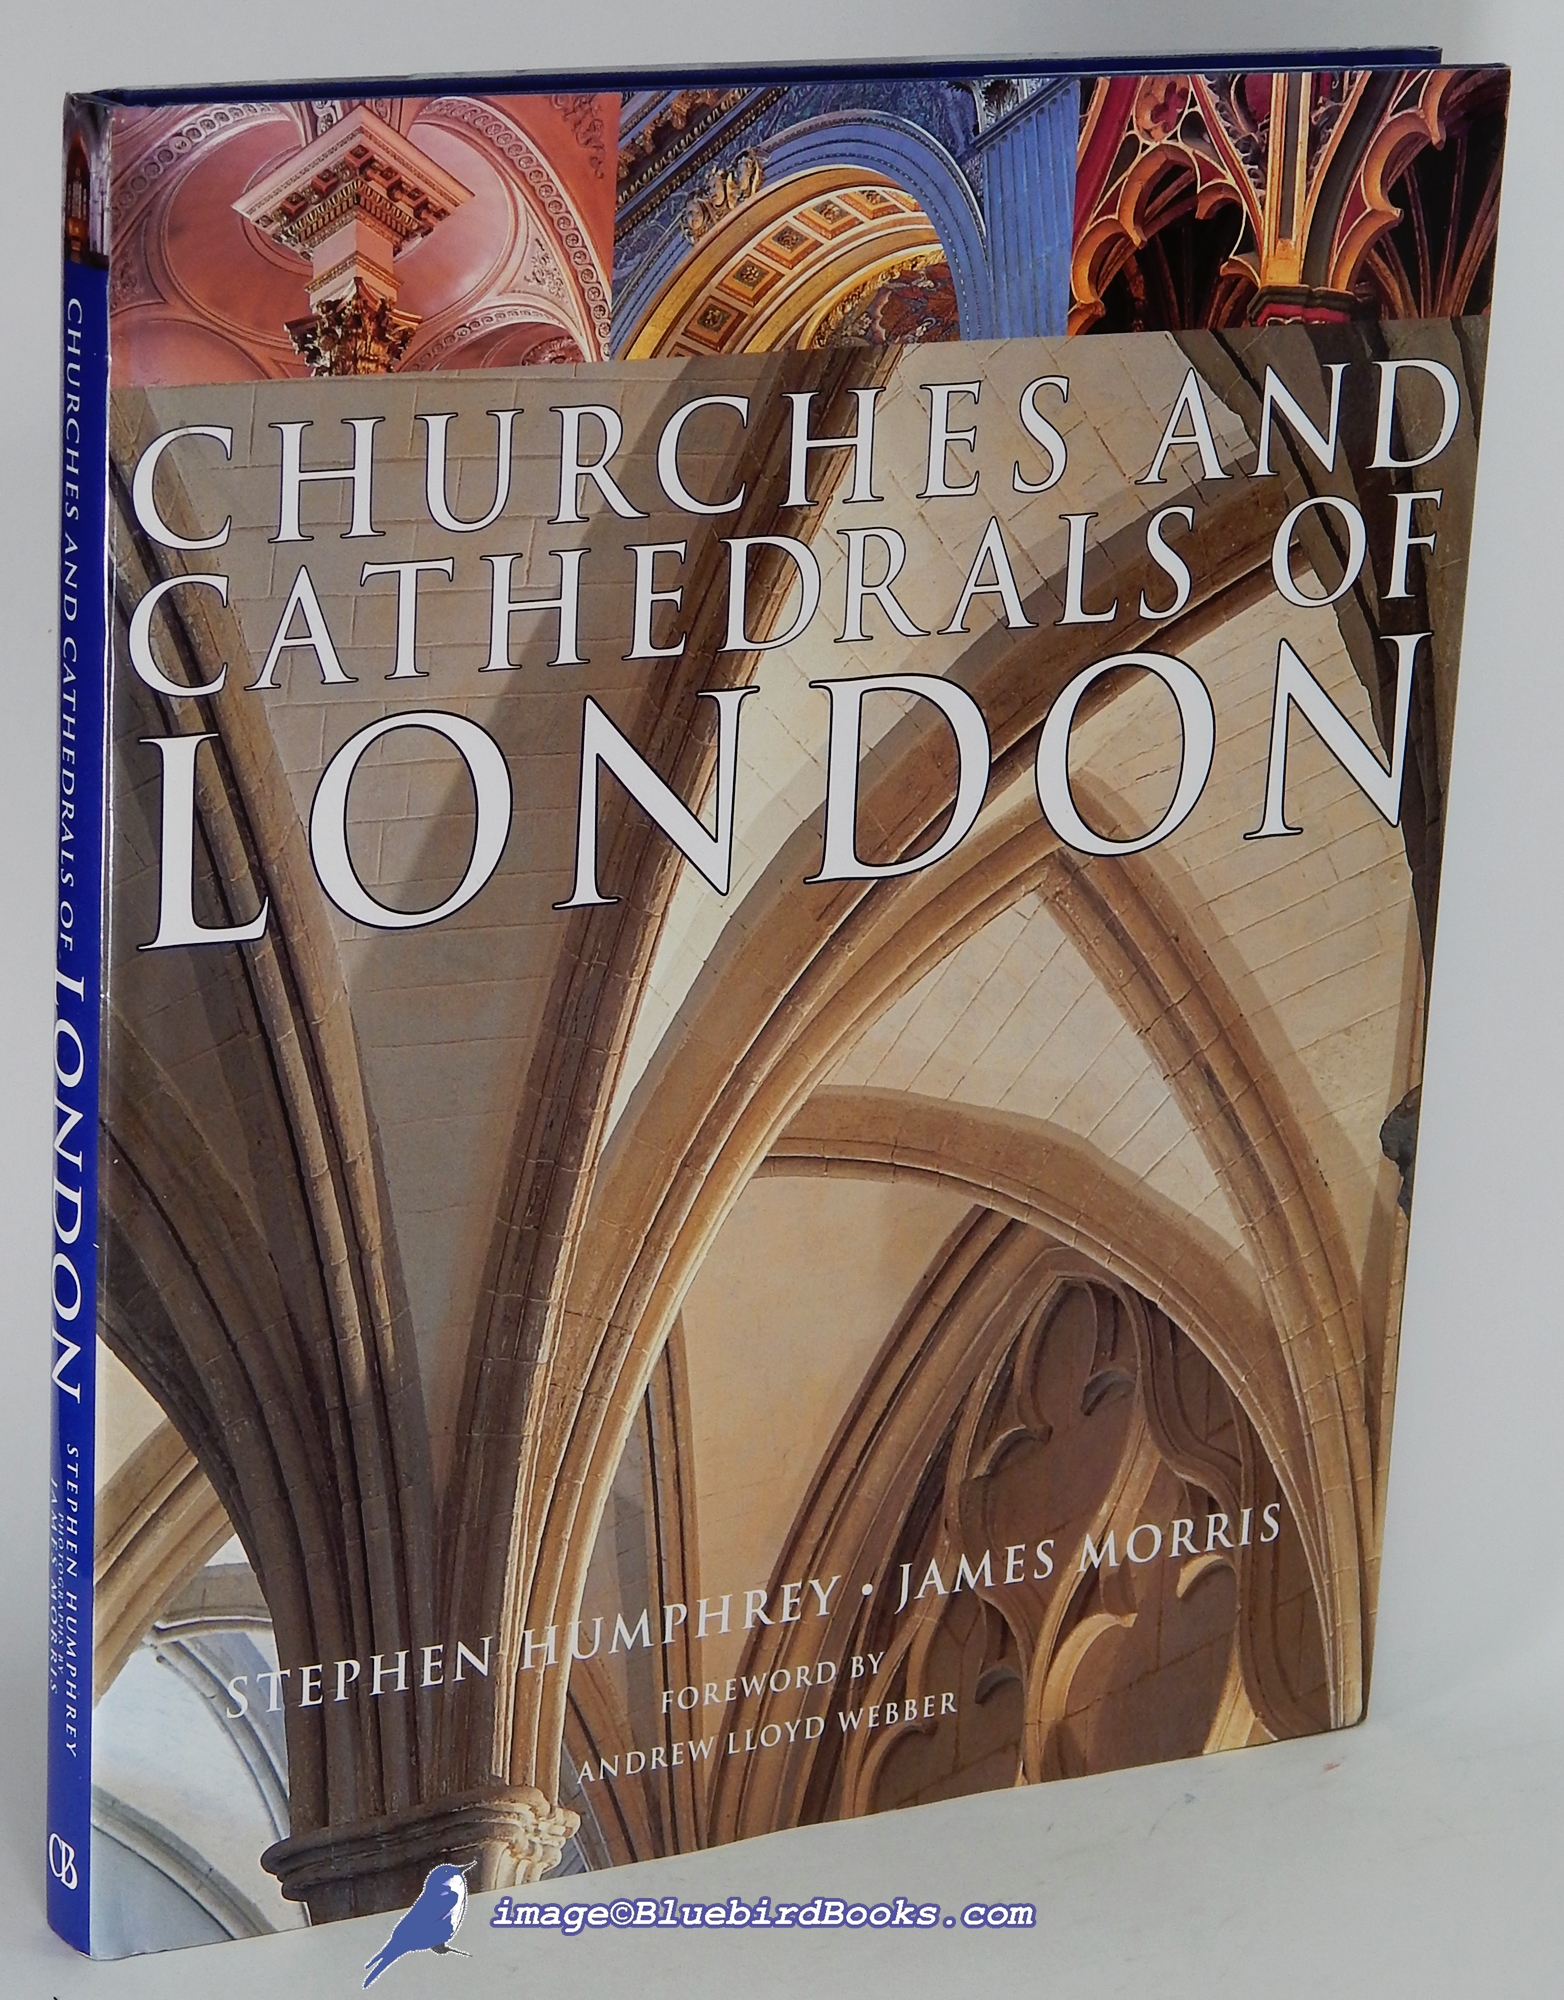 HUMPHREY, STEPHEN (AUTHOR); MORRIS, JAMES (PHOTOGRAPHY) - Churches and Cathedrals of London